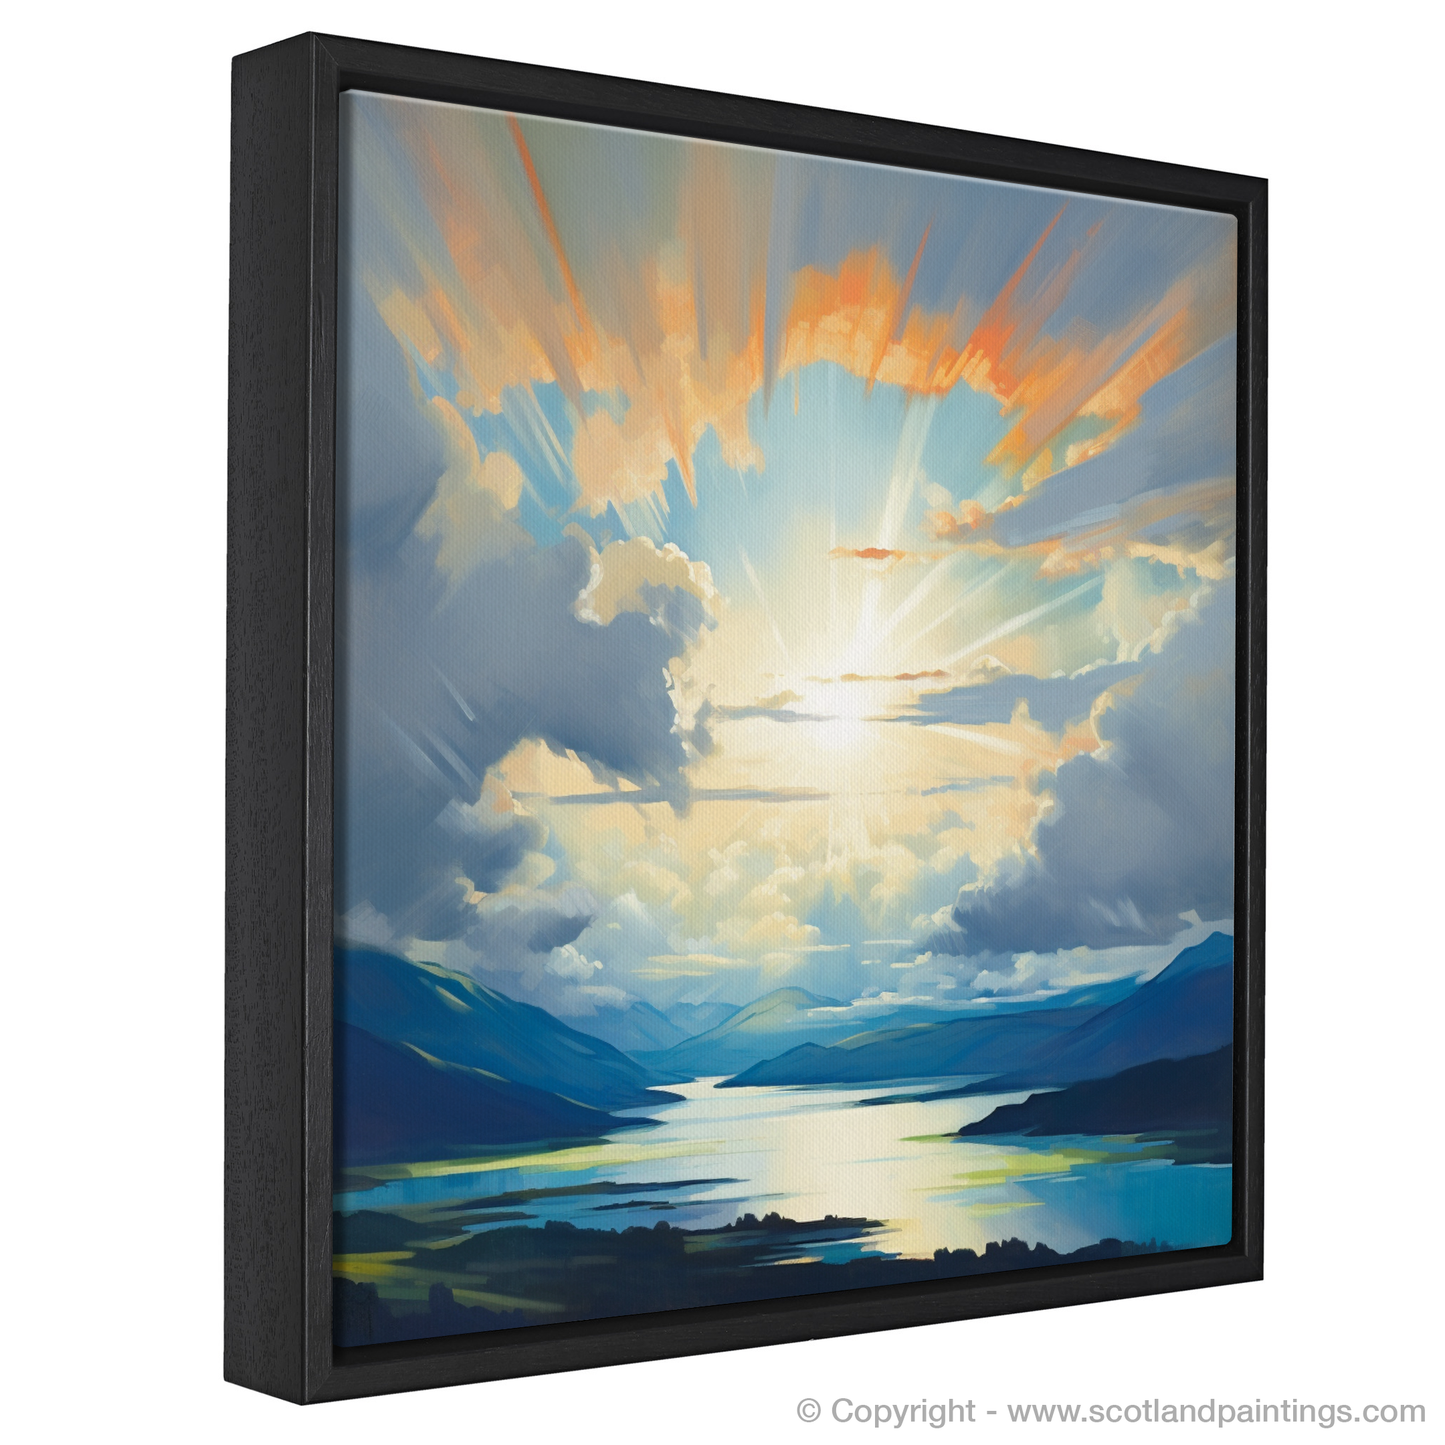 Painting and Art Print of Sun rays through clouds above Loch Lomond entitled "Sunlit Serenity over Loch Lomond".